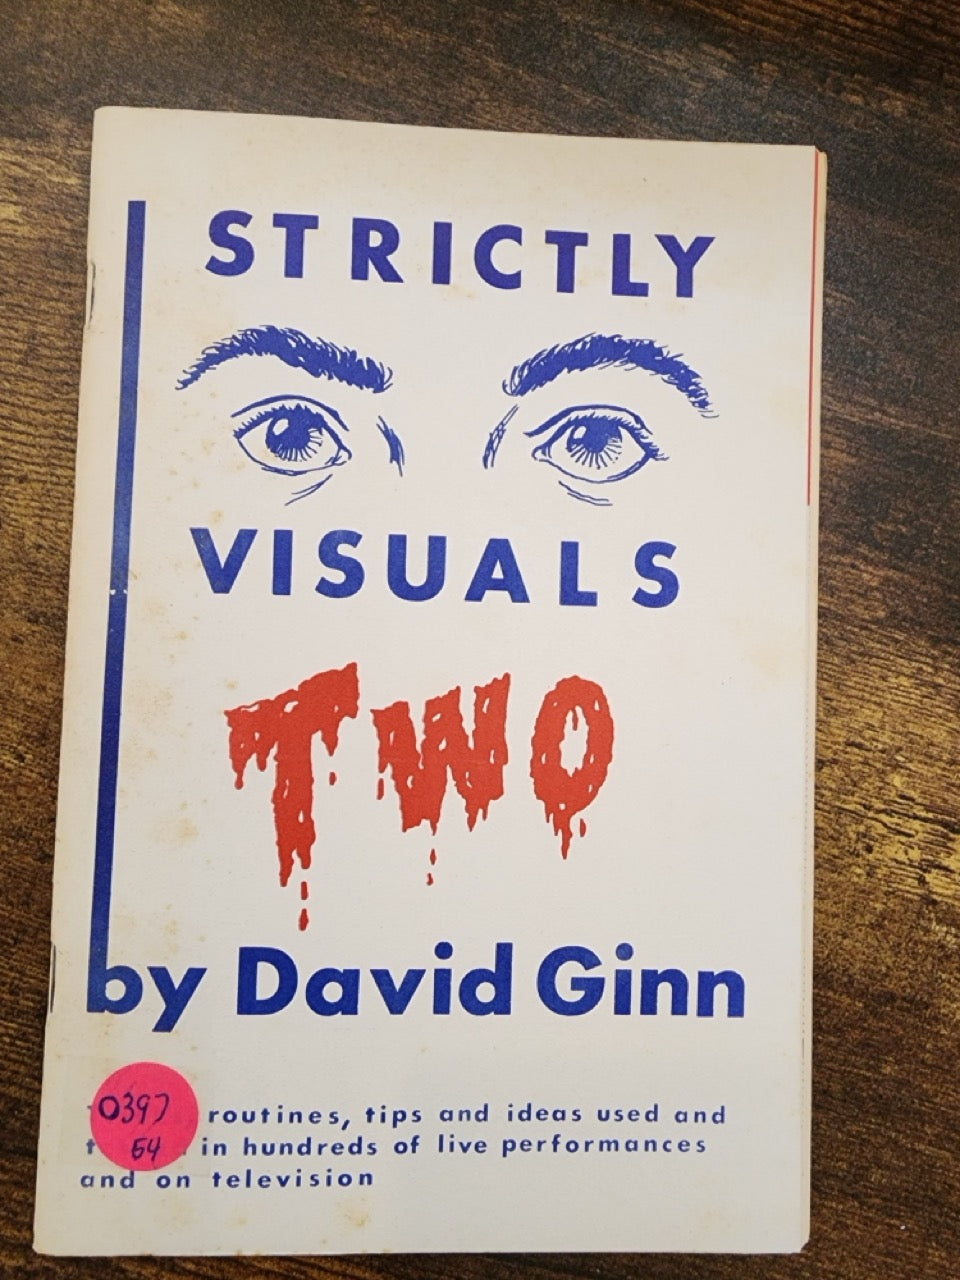 Strictly Visuals 1 & 2 - David Ginn (#2 is Signed)